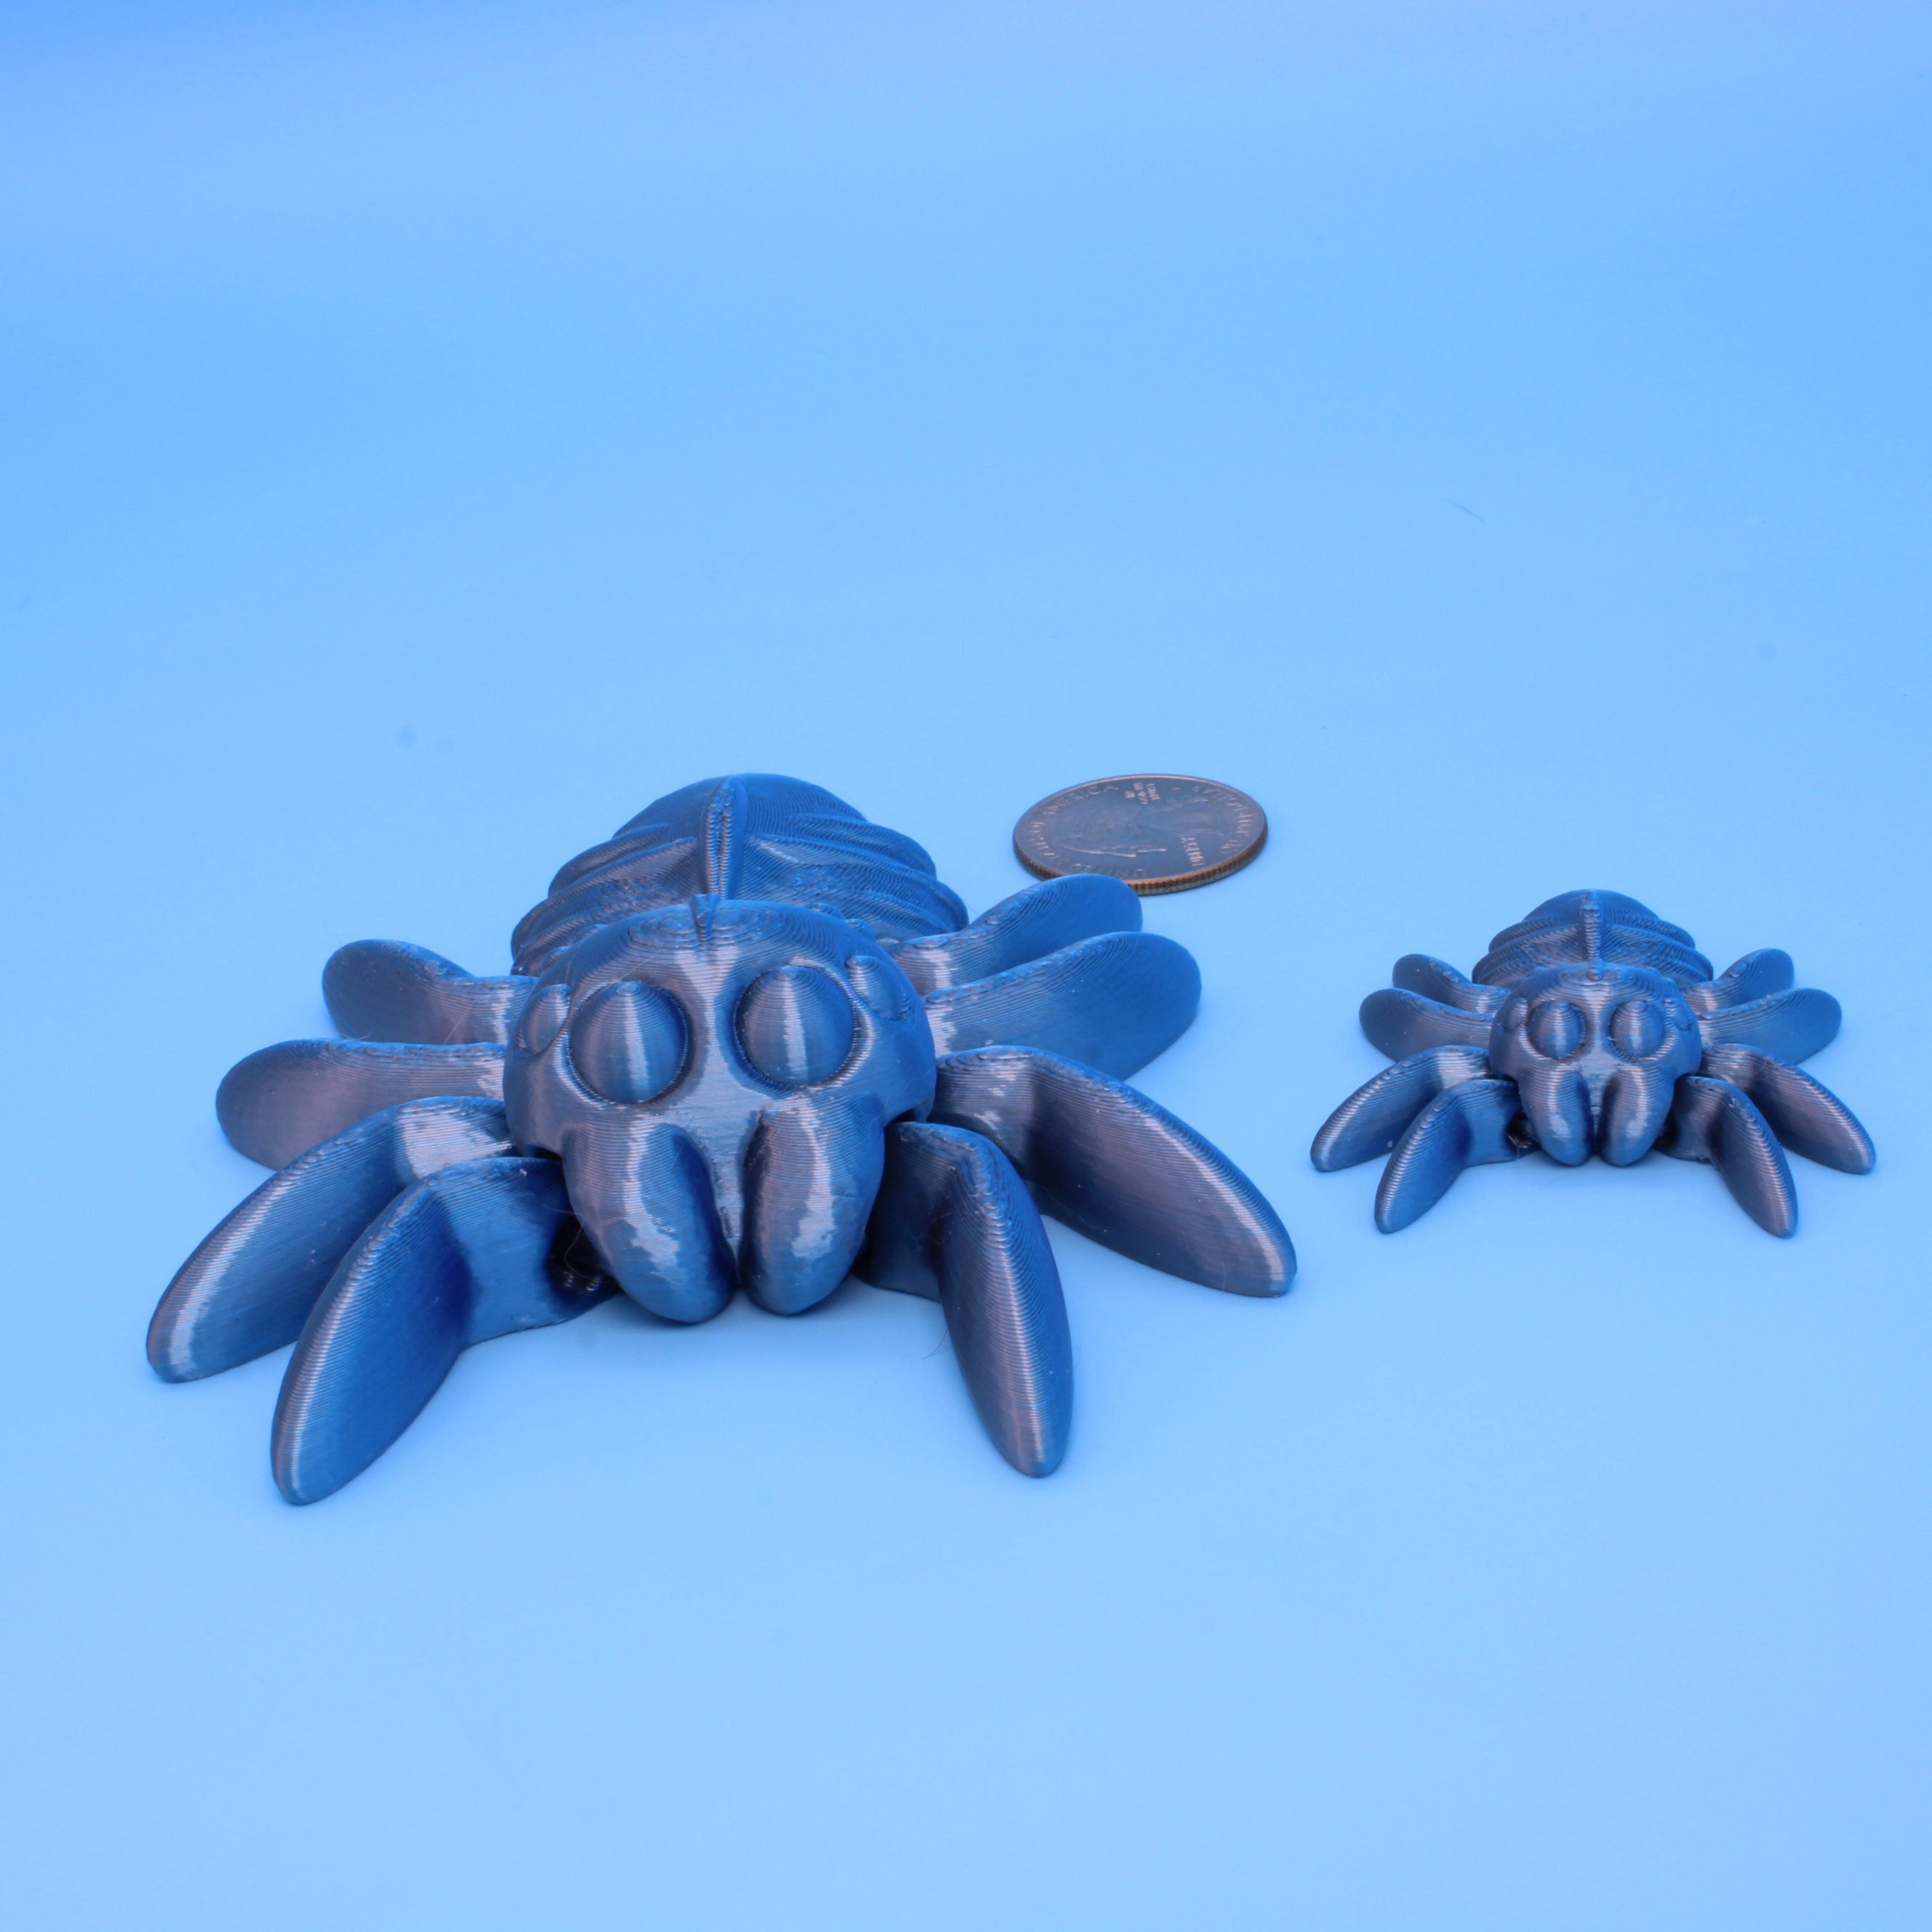 Tiny Spider. 3D printed